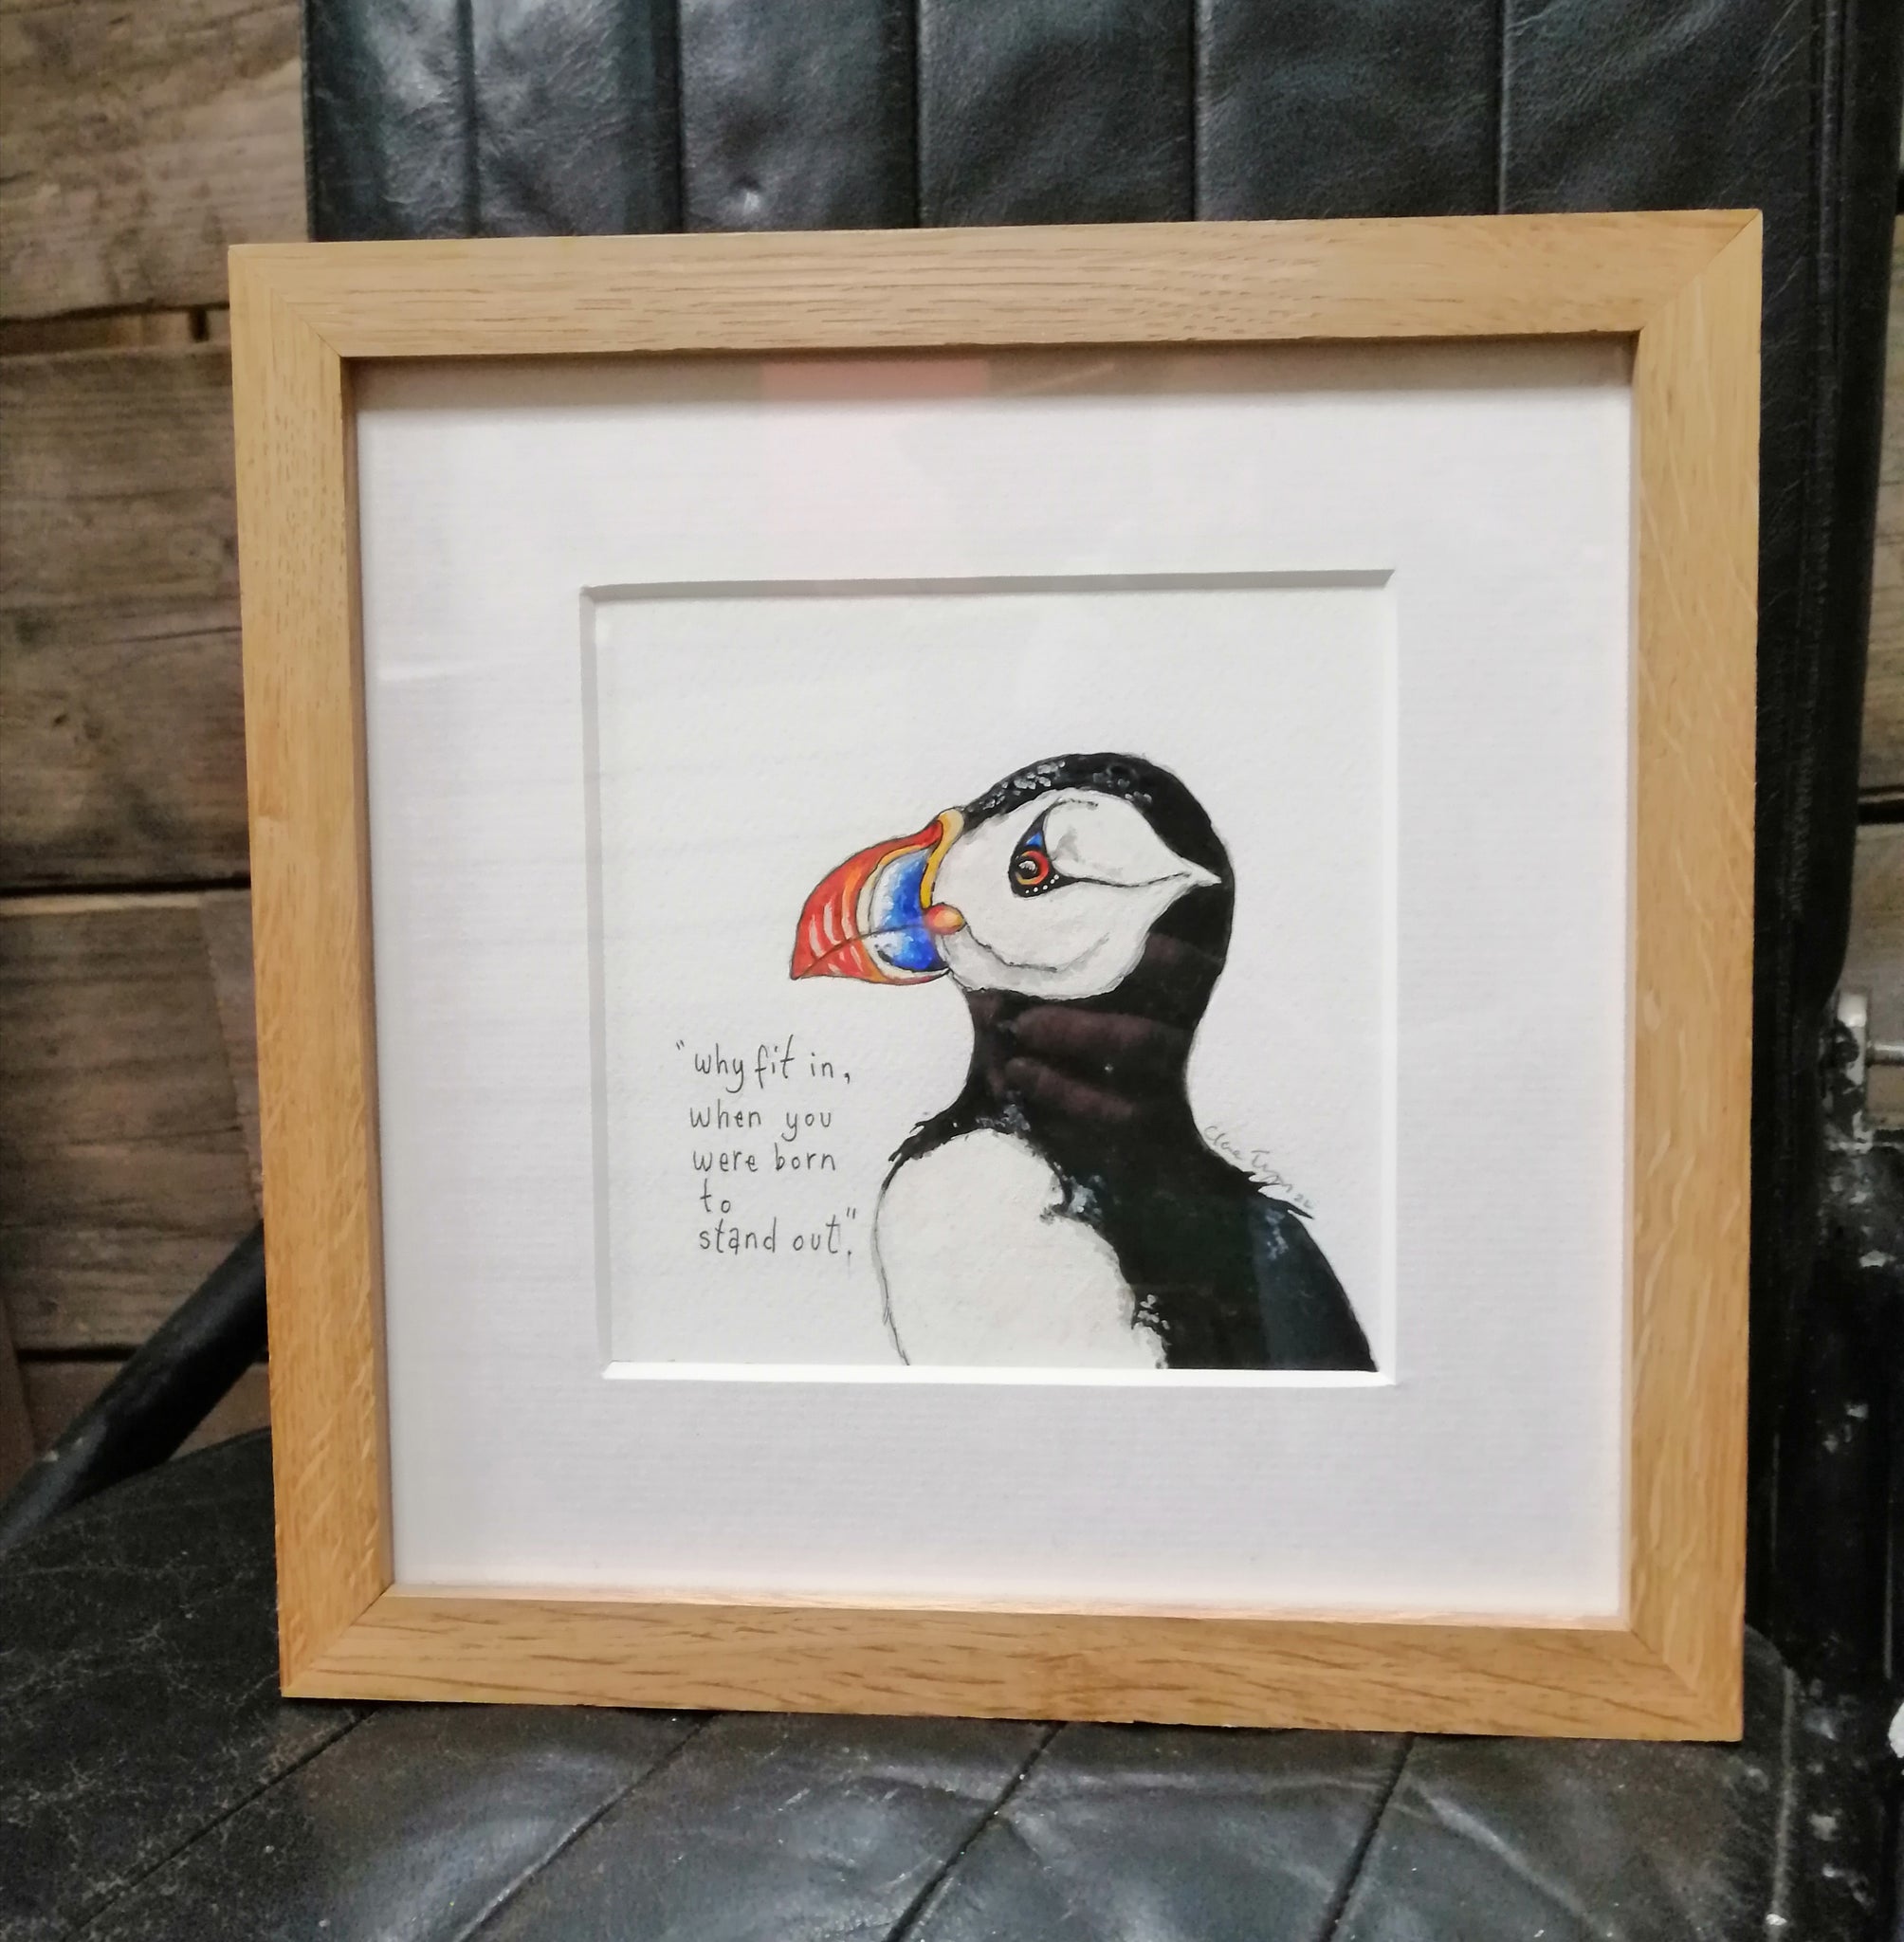 Anne. Why fit in when you were born to stand out. Framed original smiley sketch.